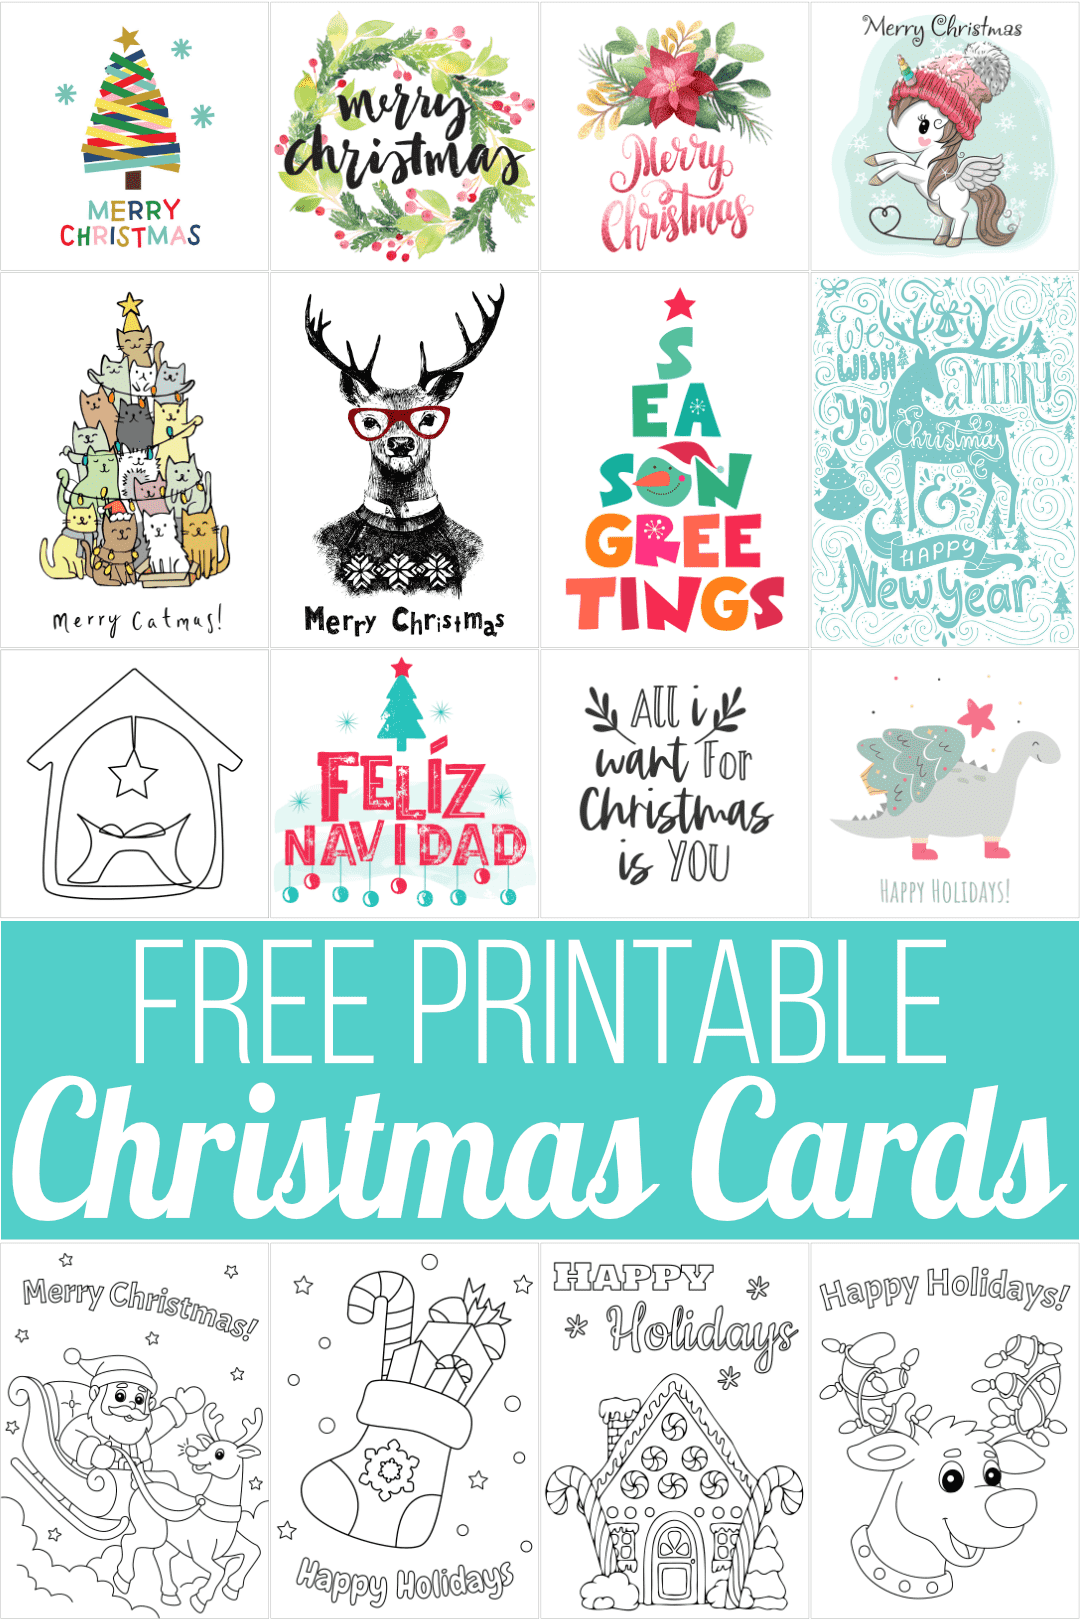 23 Free Printable Christmas Cards for 23 Within Template For Cards To Print Free